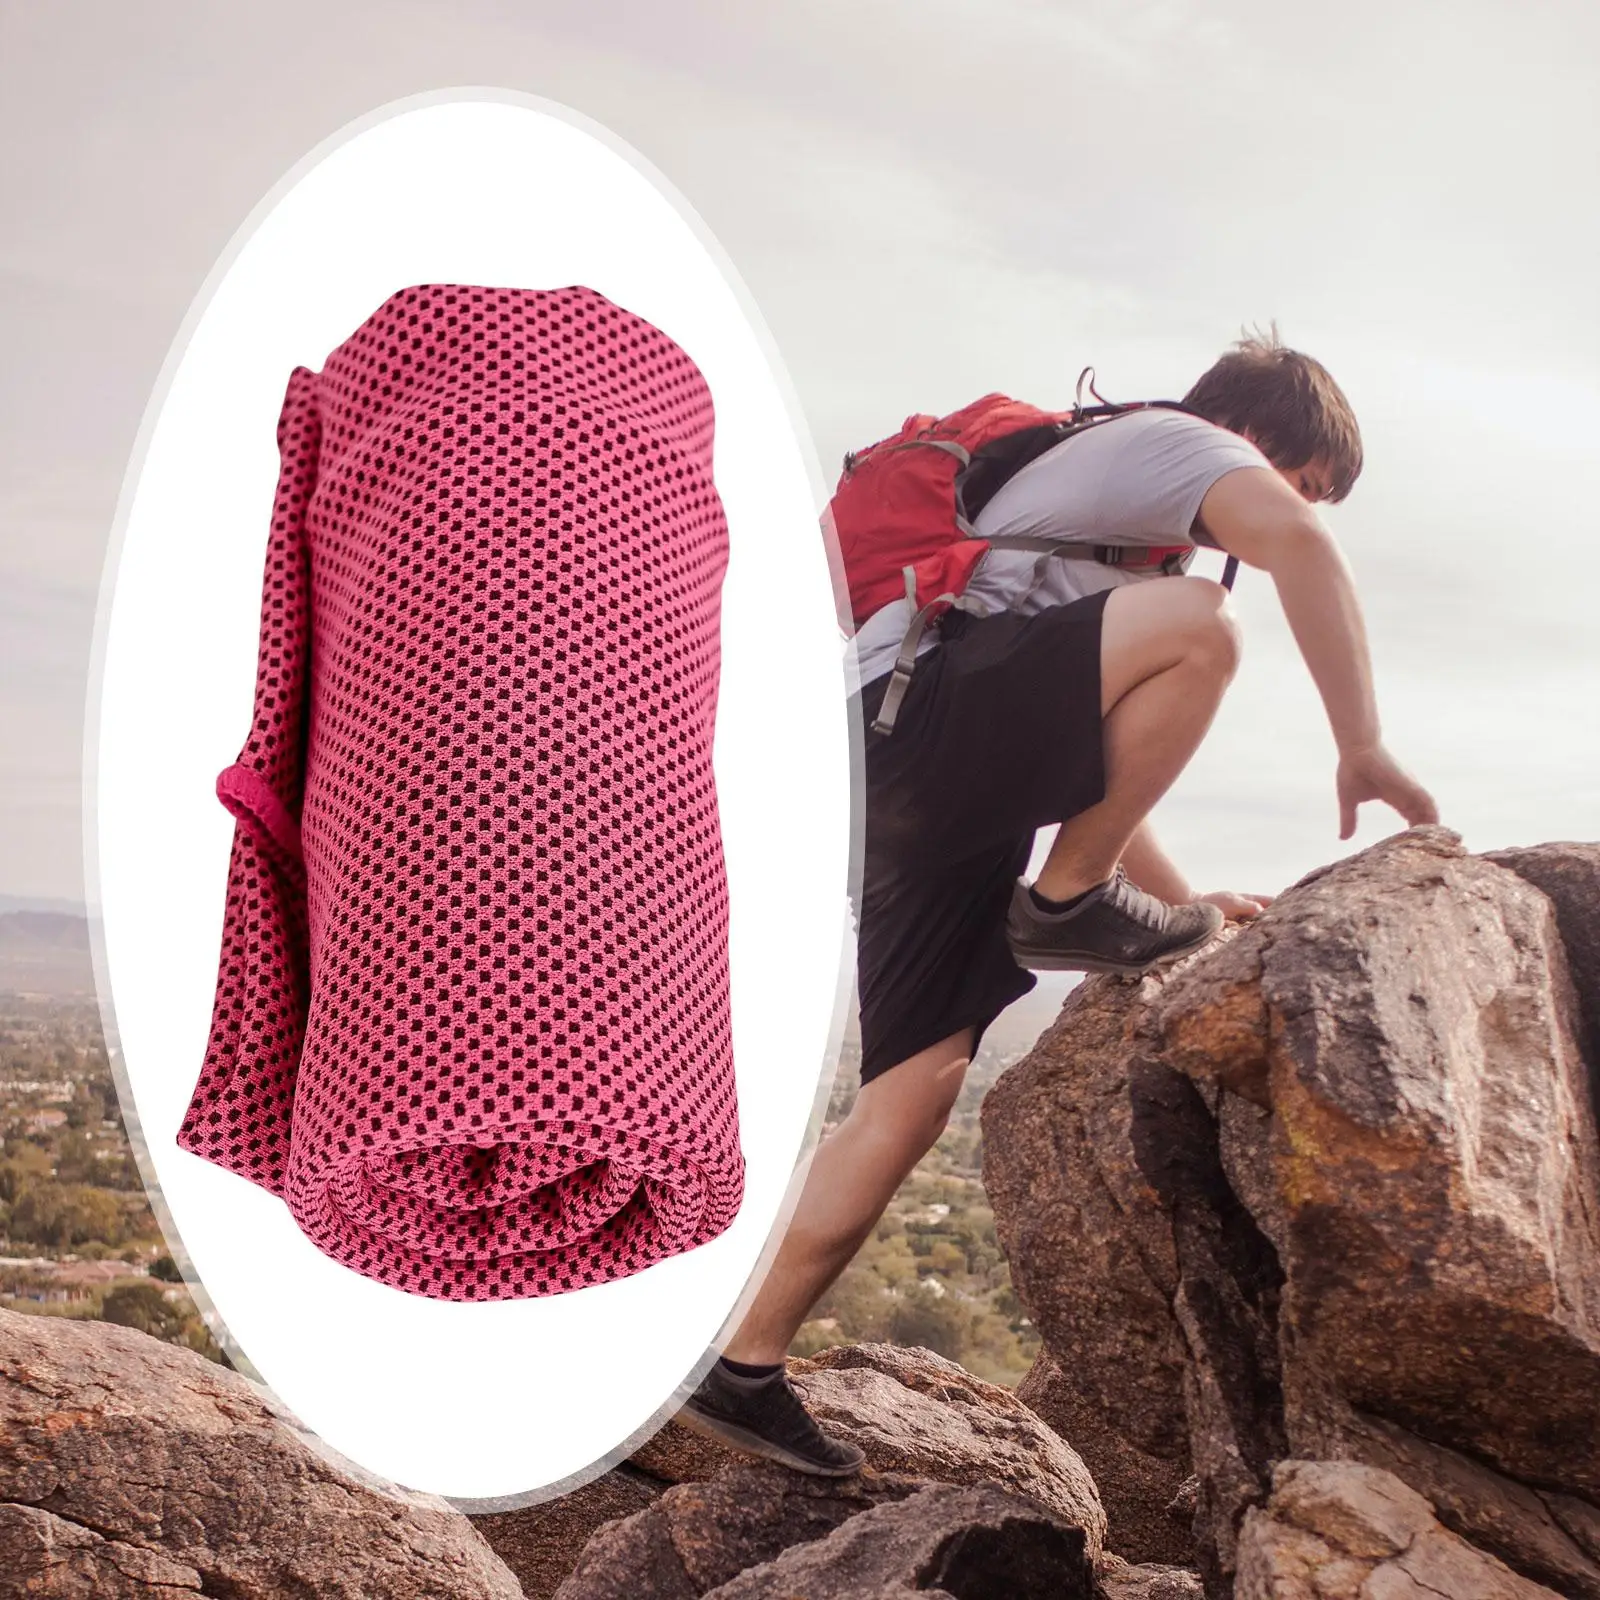 Microfiber Cooling Towel Cooling Neck and Face Towel Soft Breathable Cold Towel